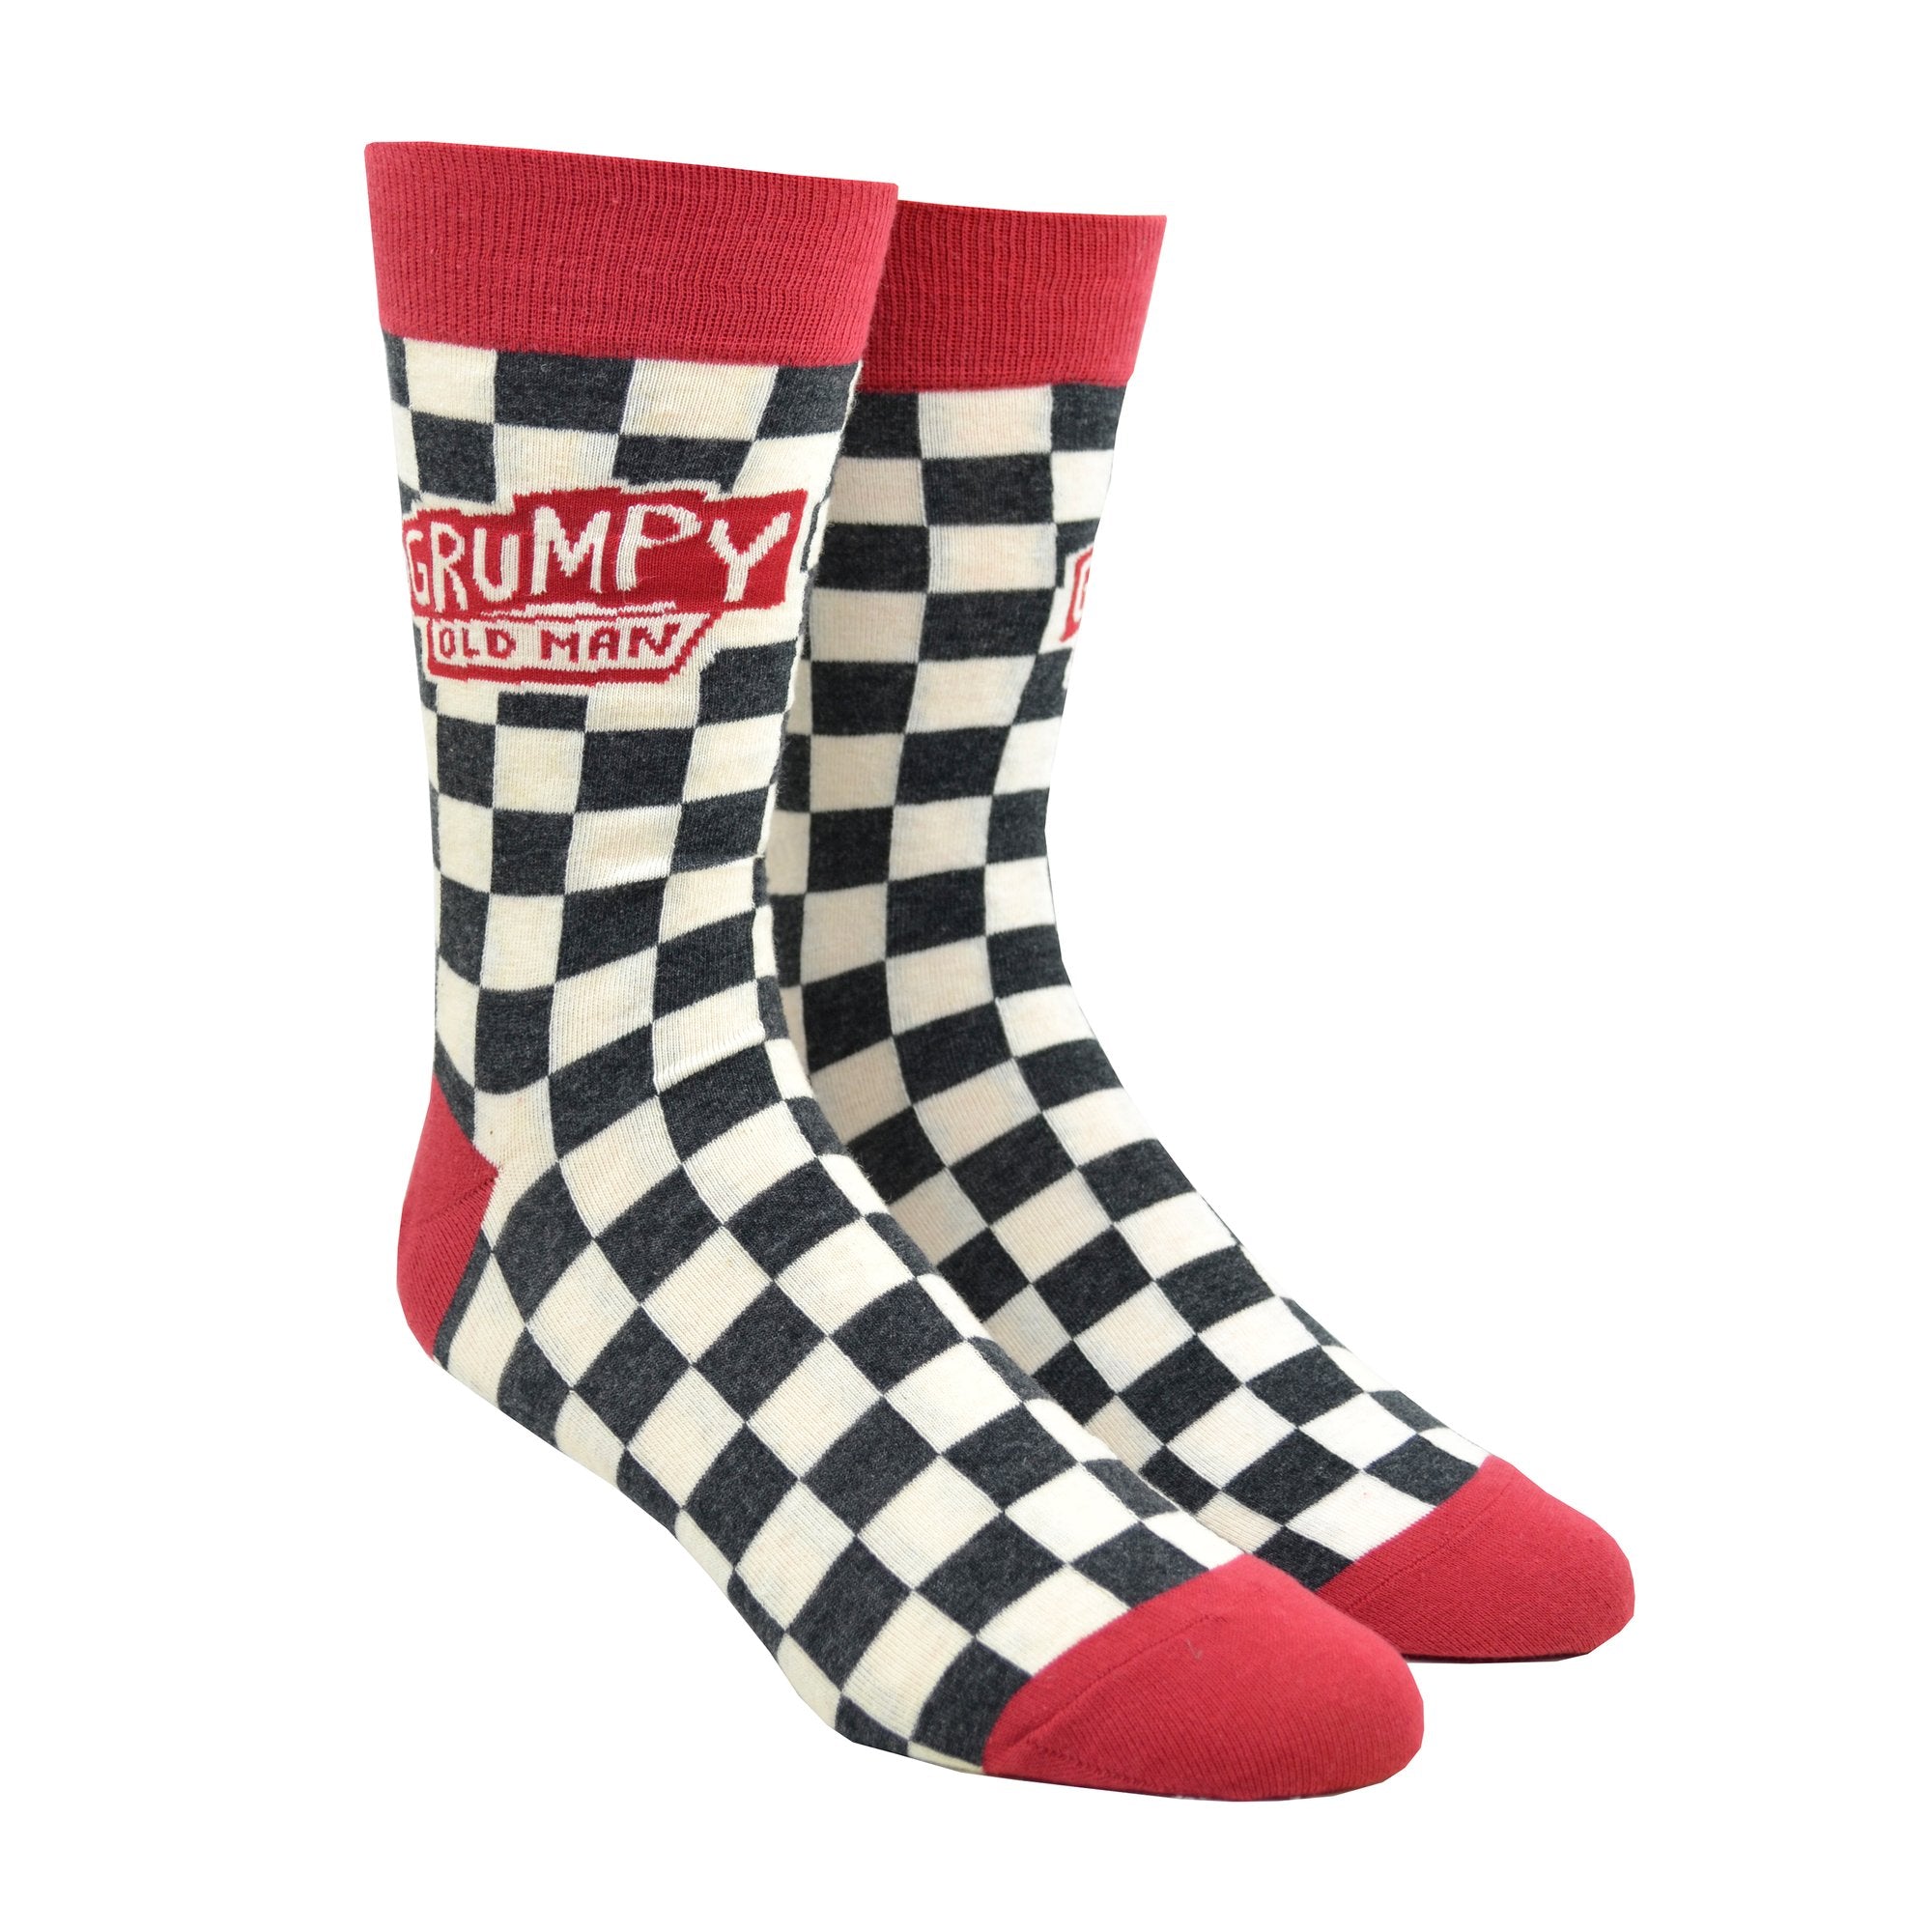 black and white checker socks with red tips and it says grumpy old man